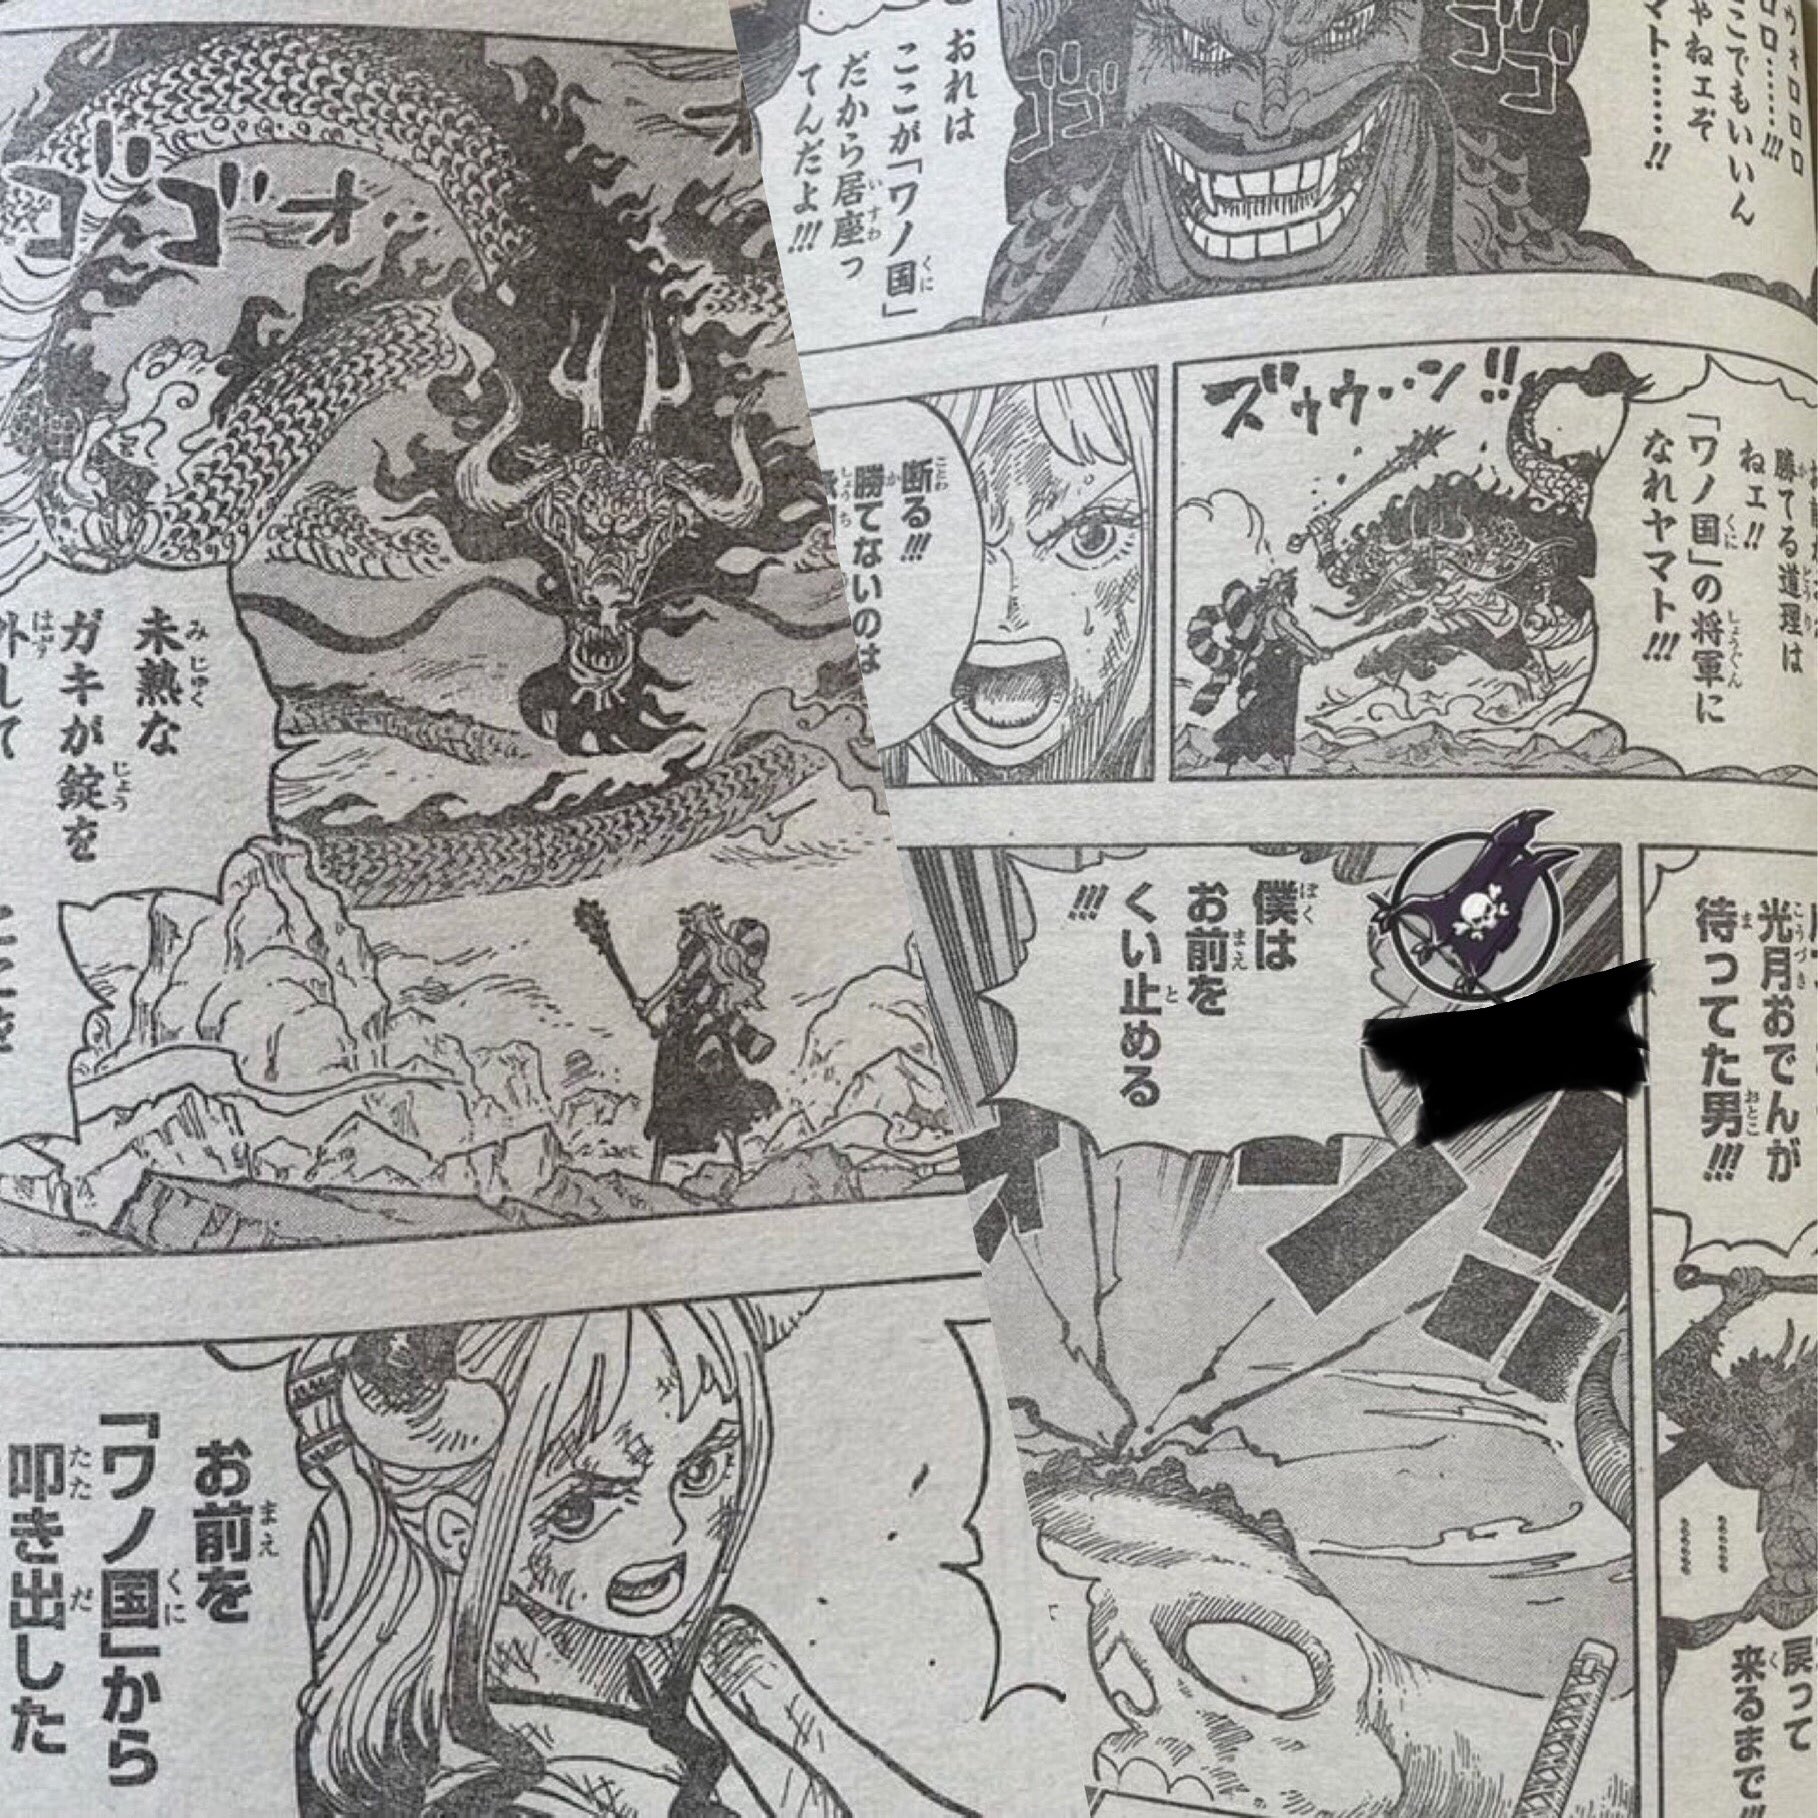 Fluffycactus Chapter 1016 Spoilers Yamato And Kaido Are Fighting Up On The Roof Exchanging Blows Yamato Tells Kaido He She Wants To Go Out To Sea With Luffy But First Needs